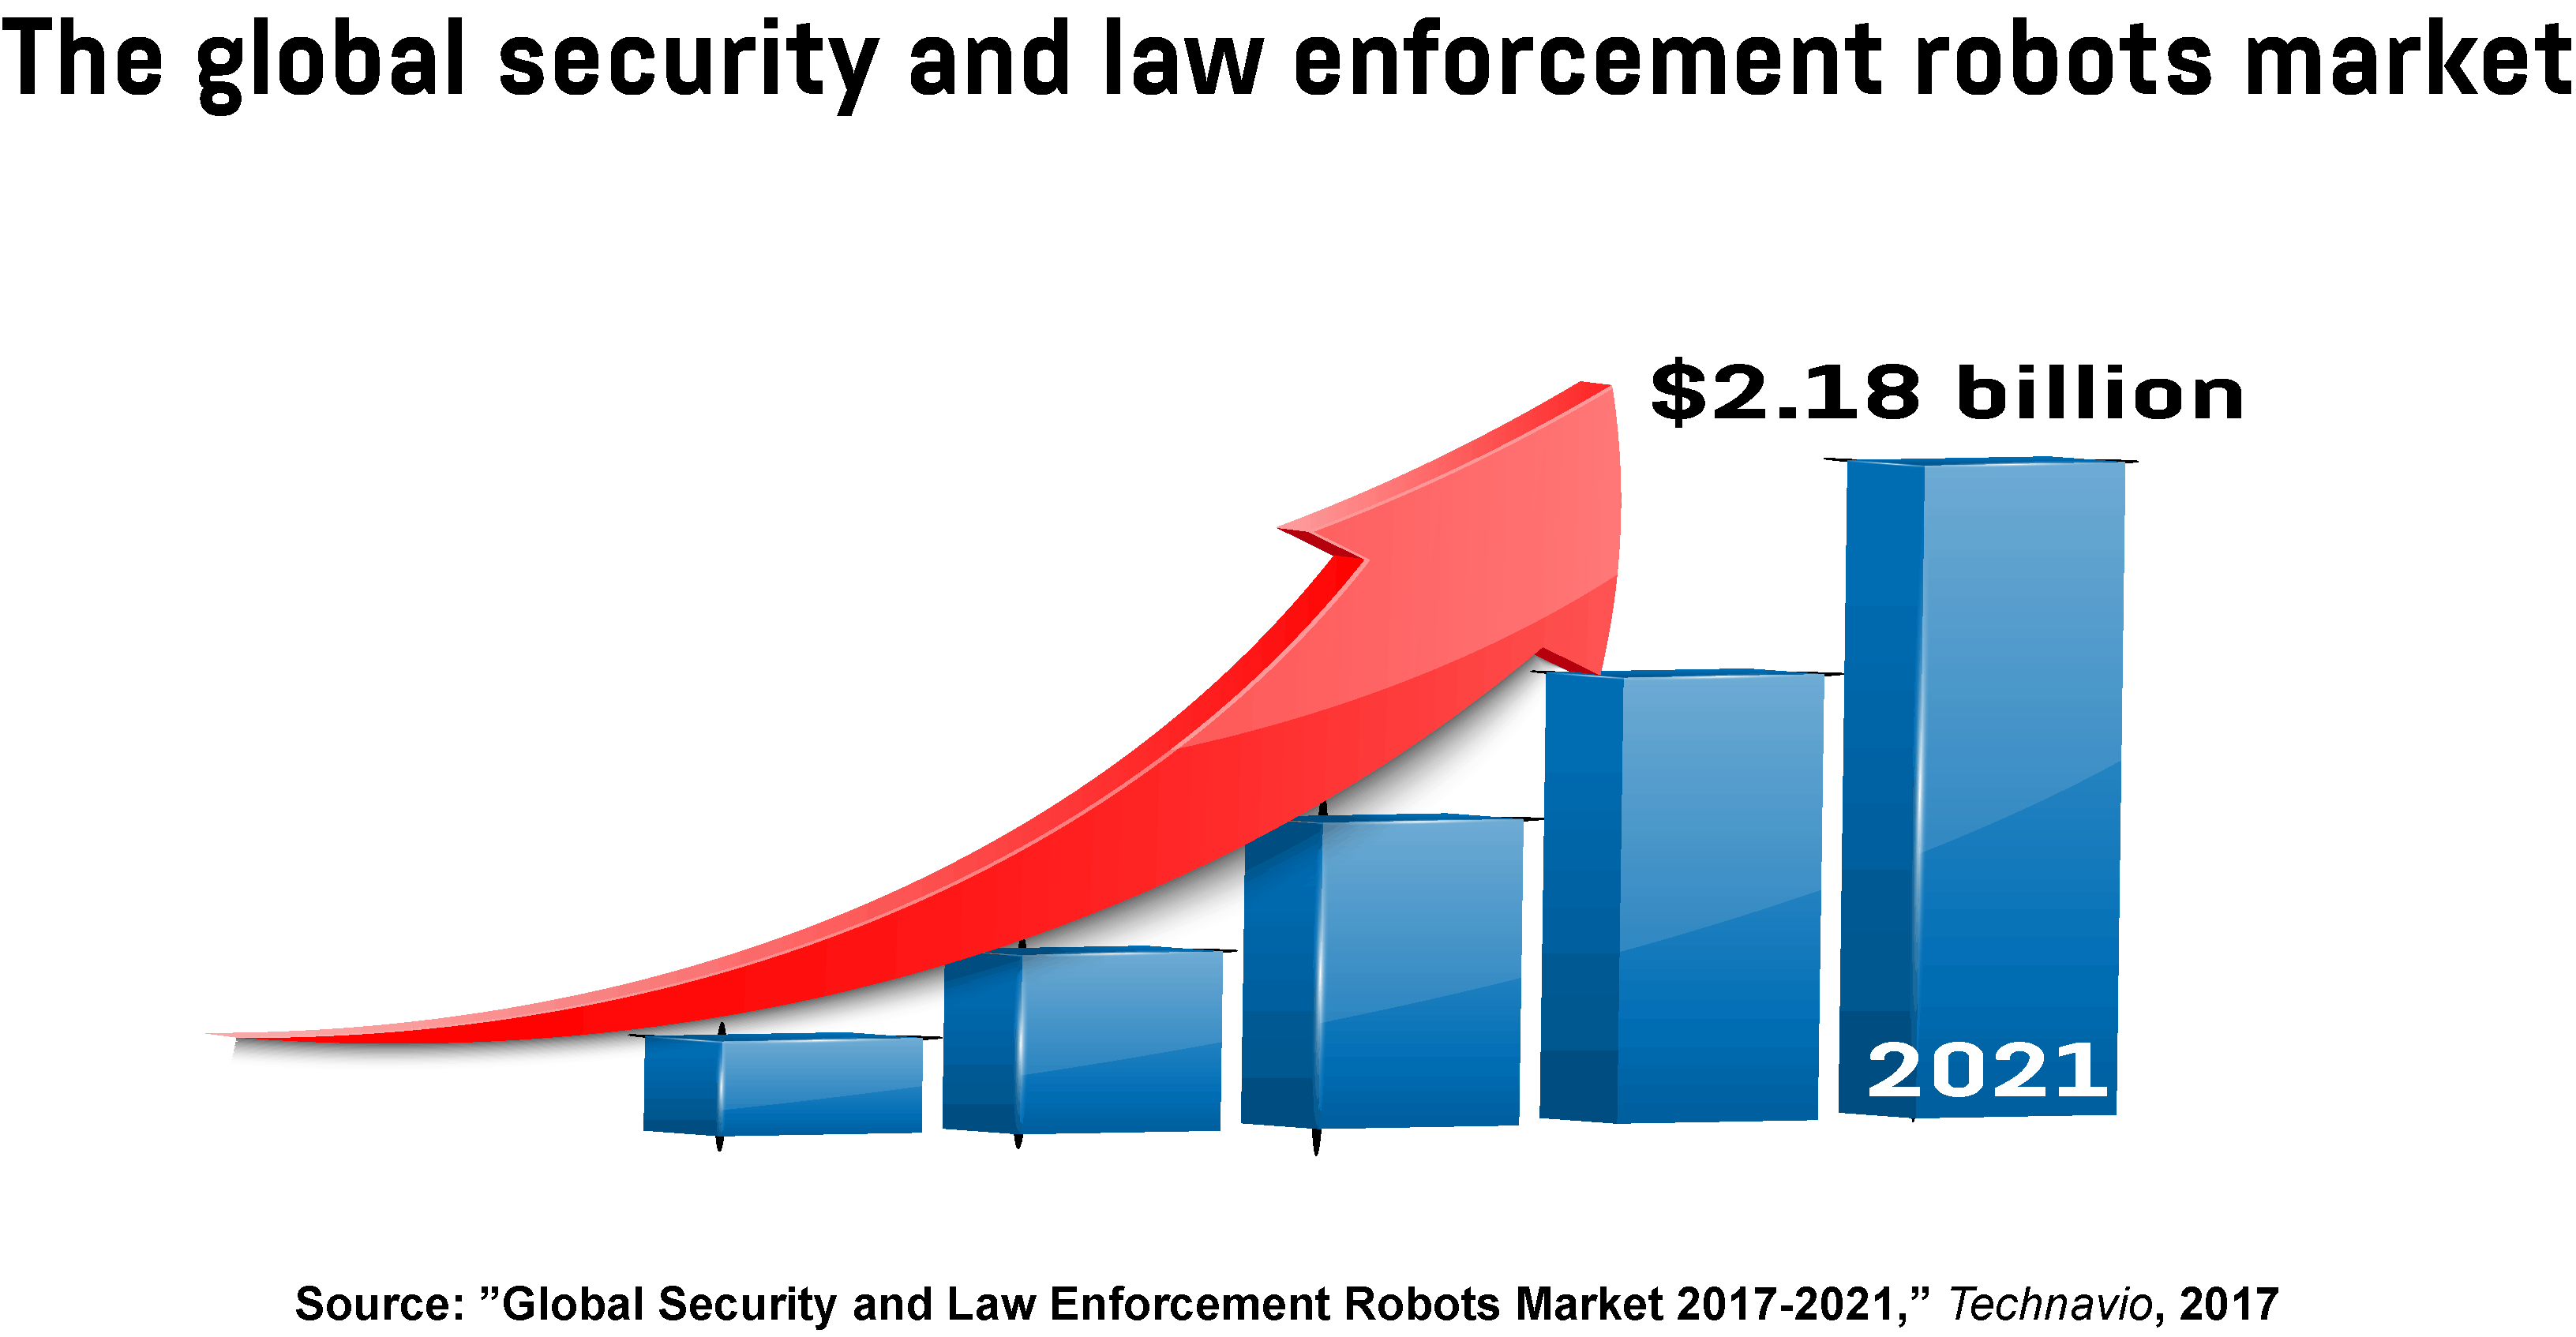  Graph showing the growth of the global security and law enforcement robots market by 2021.